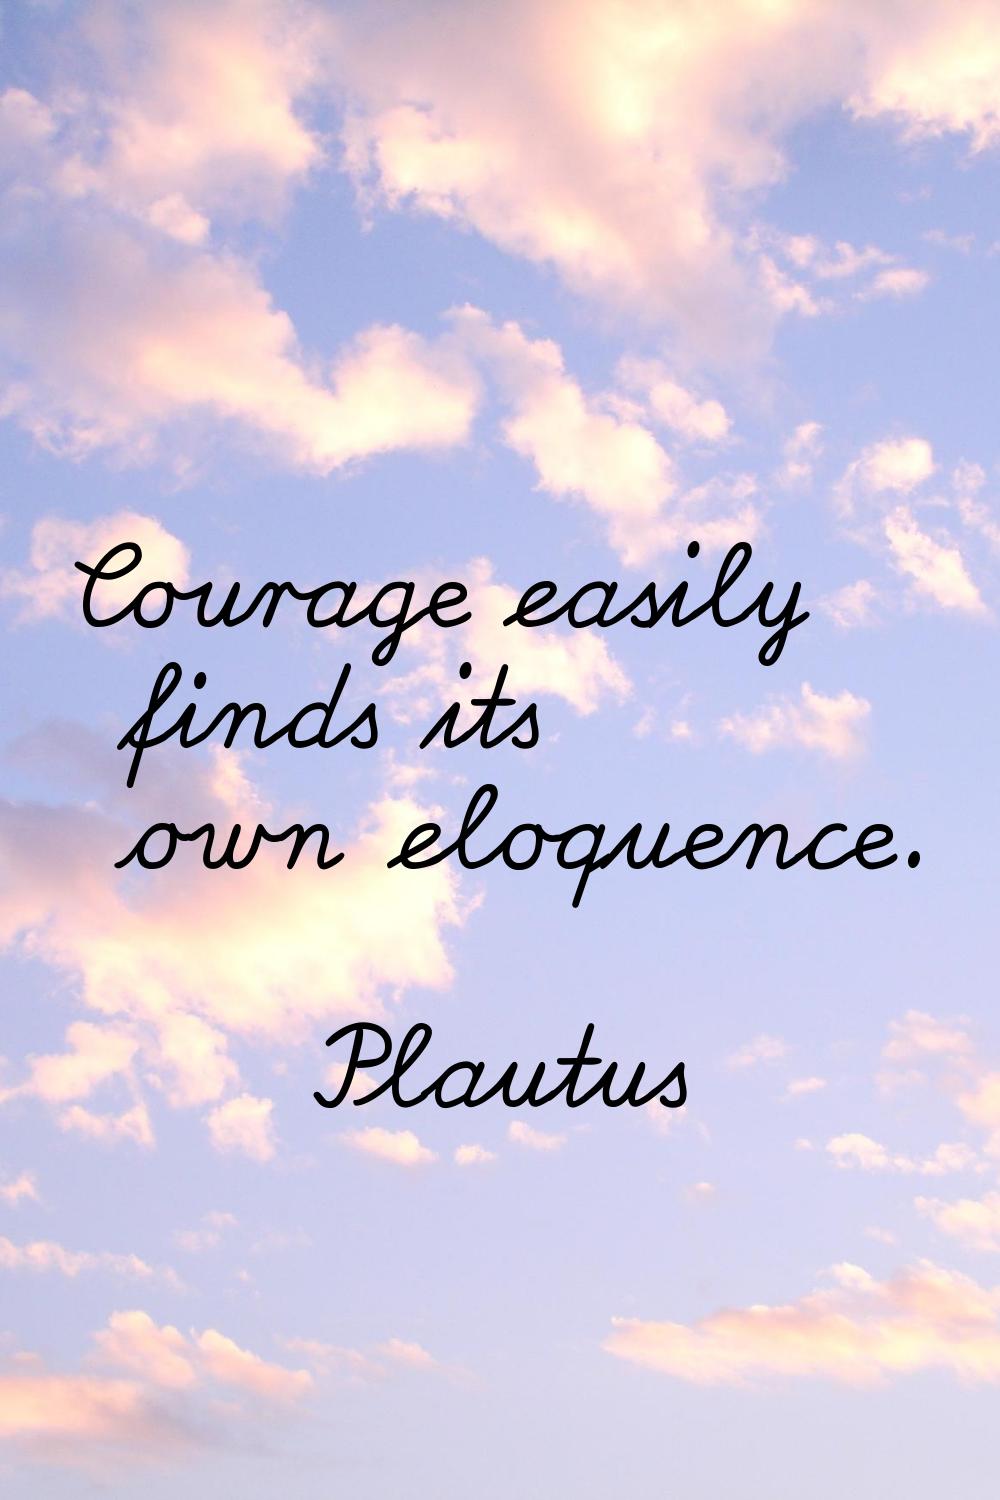 Courage easily finds its own eloquence.